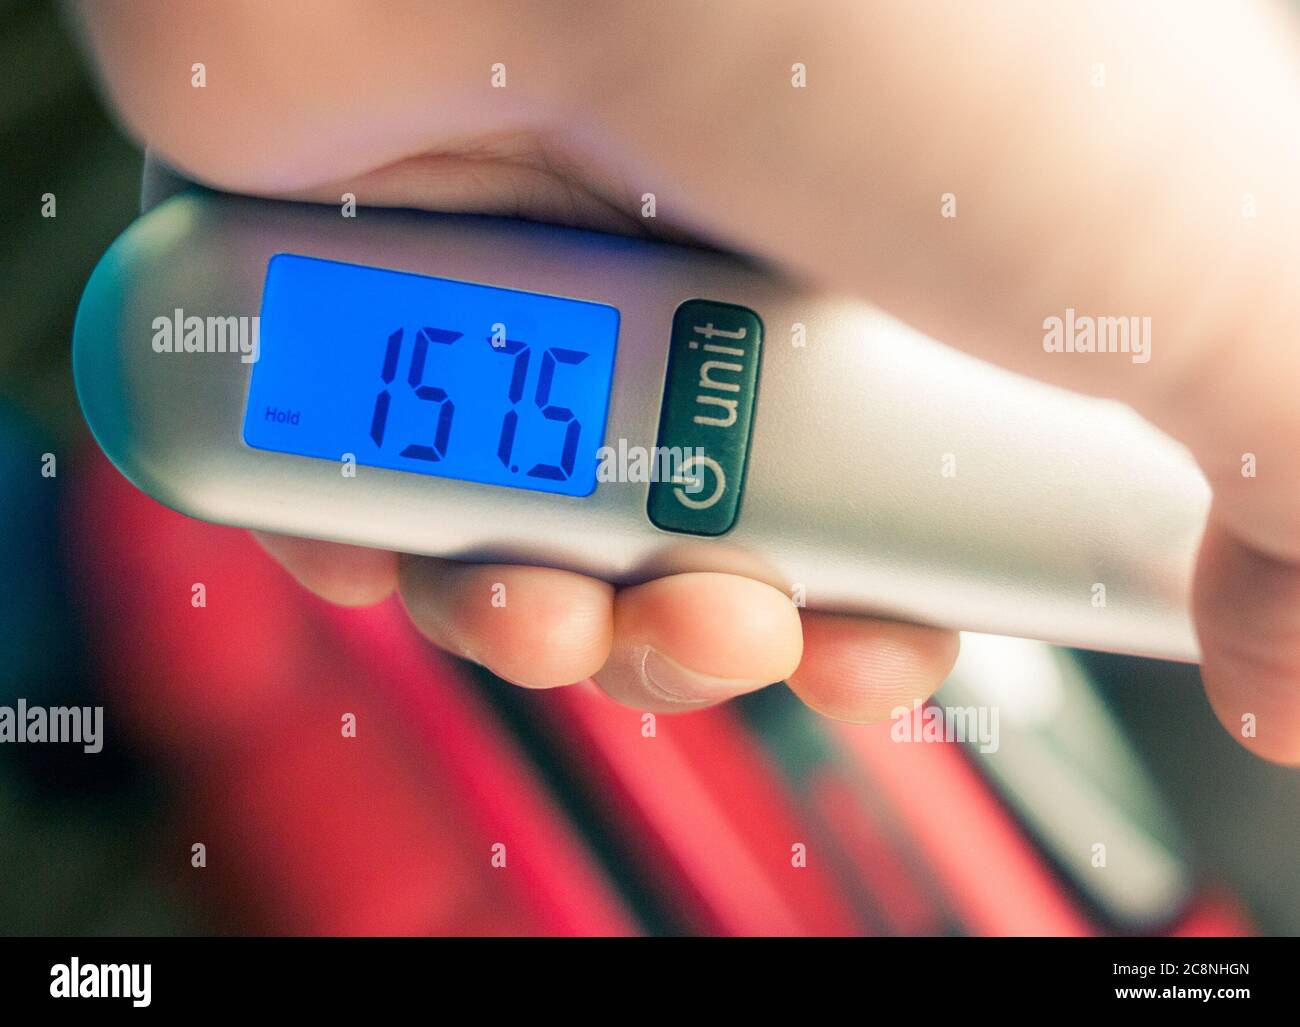 https://c8.alamy.com/comp/2C8NHGN/electronic-hand-scales-in-hand-showing-weight-of-a-luggage-on-its-screen-2C8NHGN.jpg